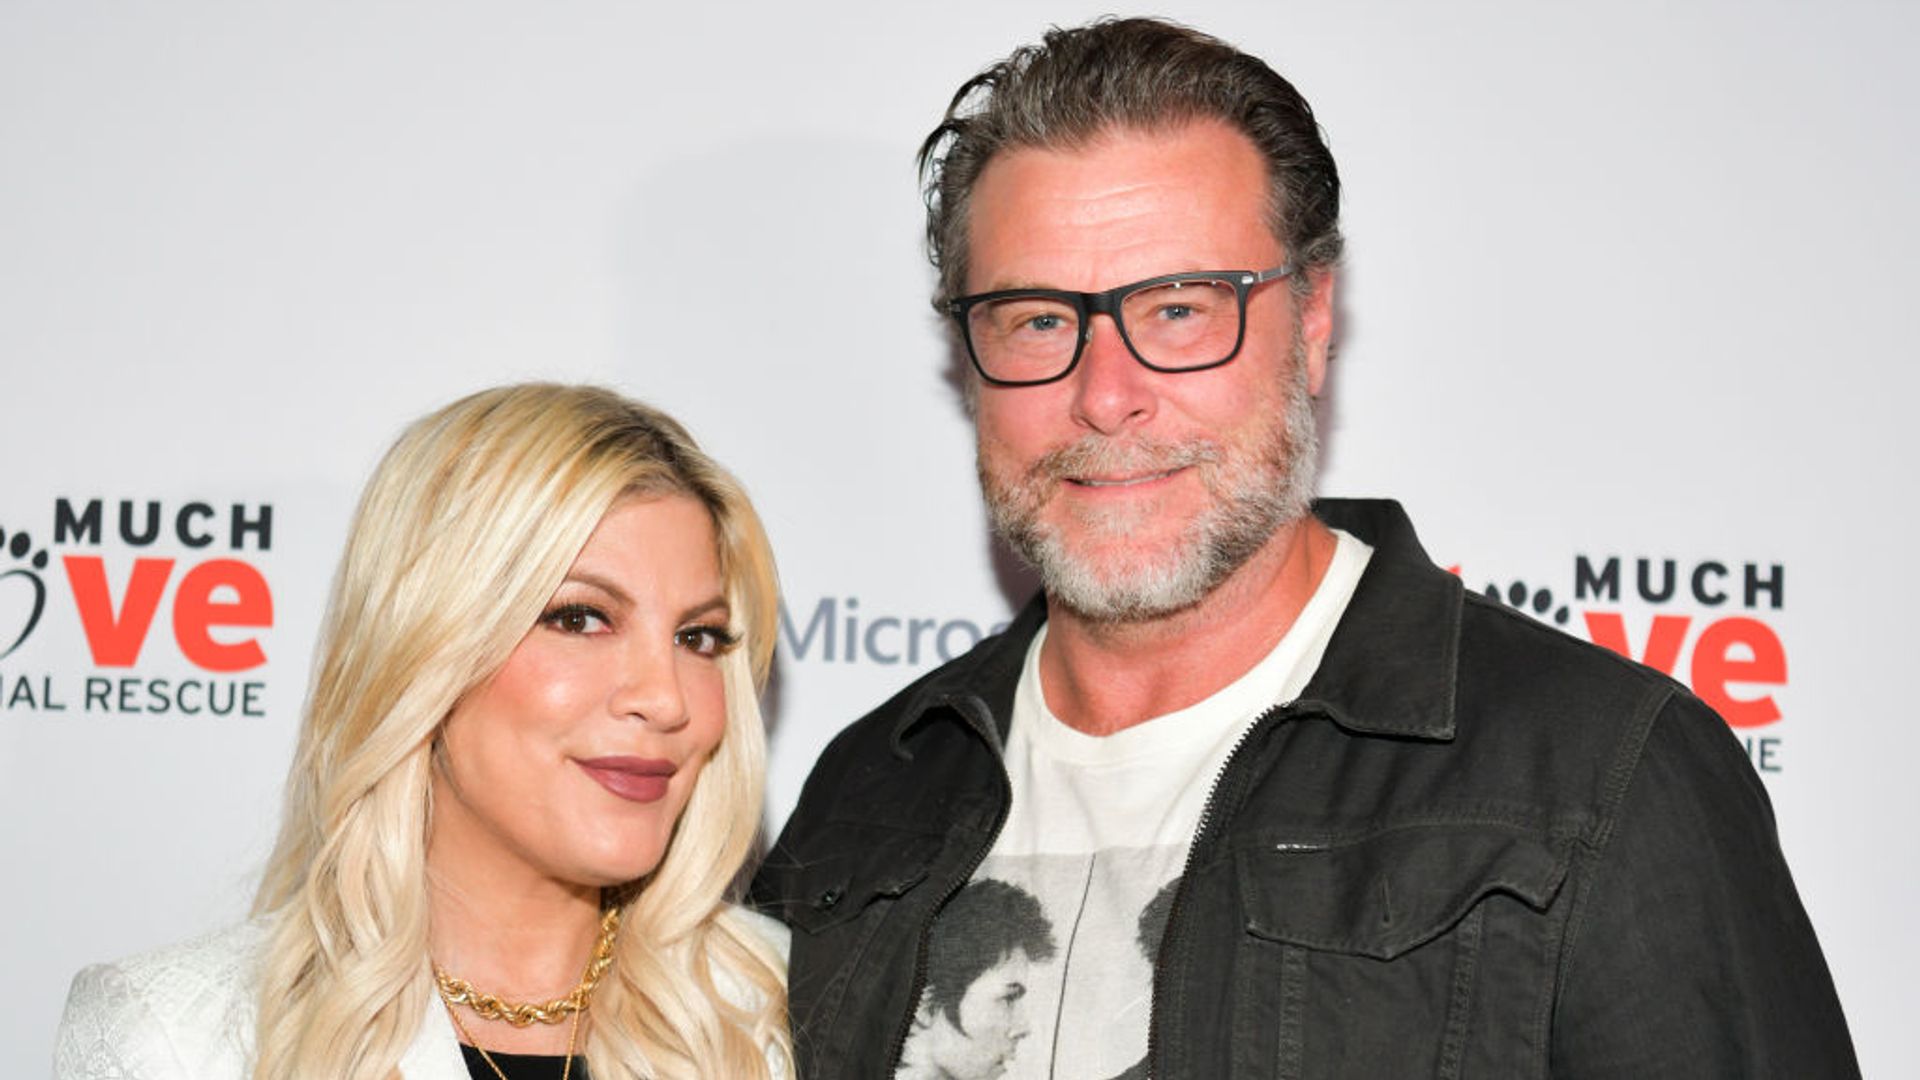 Tori Spelling and Dean McDermott pose for a photo with a guard after  leaving Malibu Park Malibu, California - 13.02.12 Stock Photo - Alamy